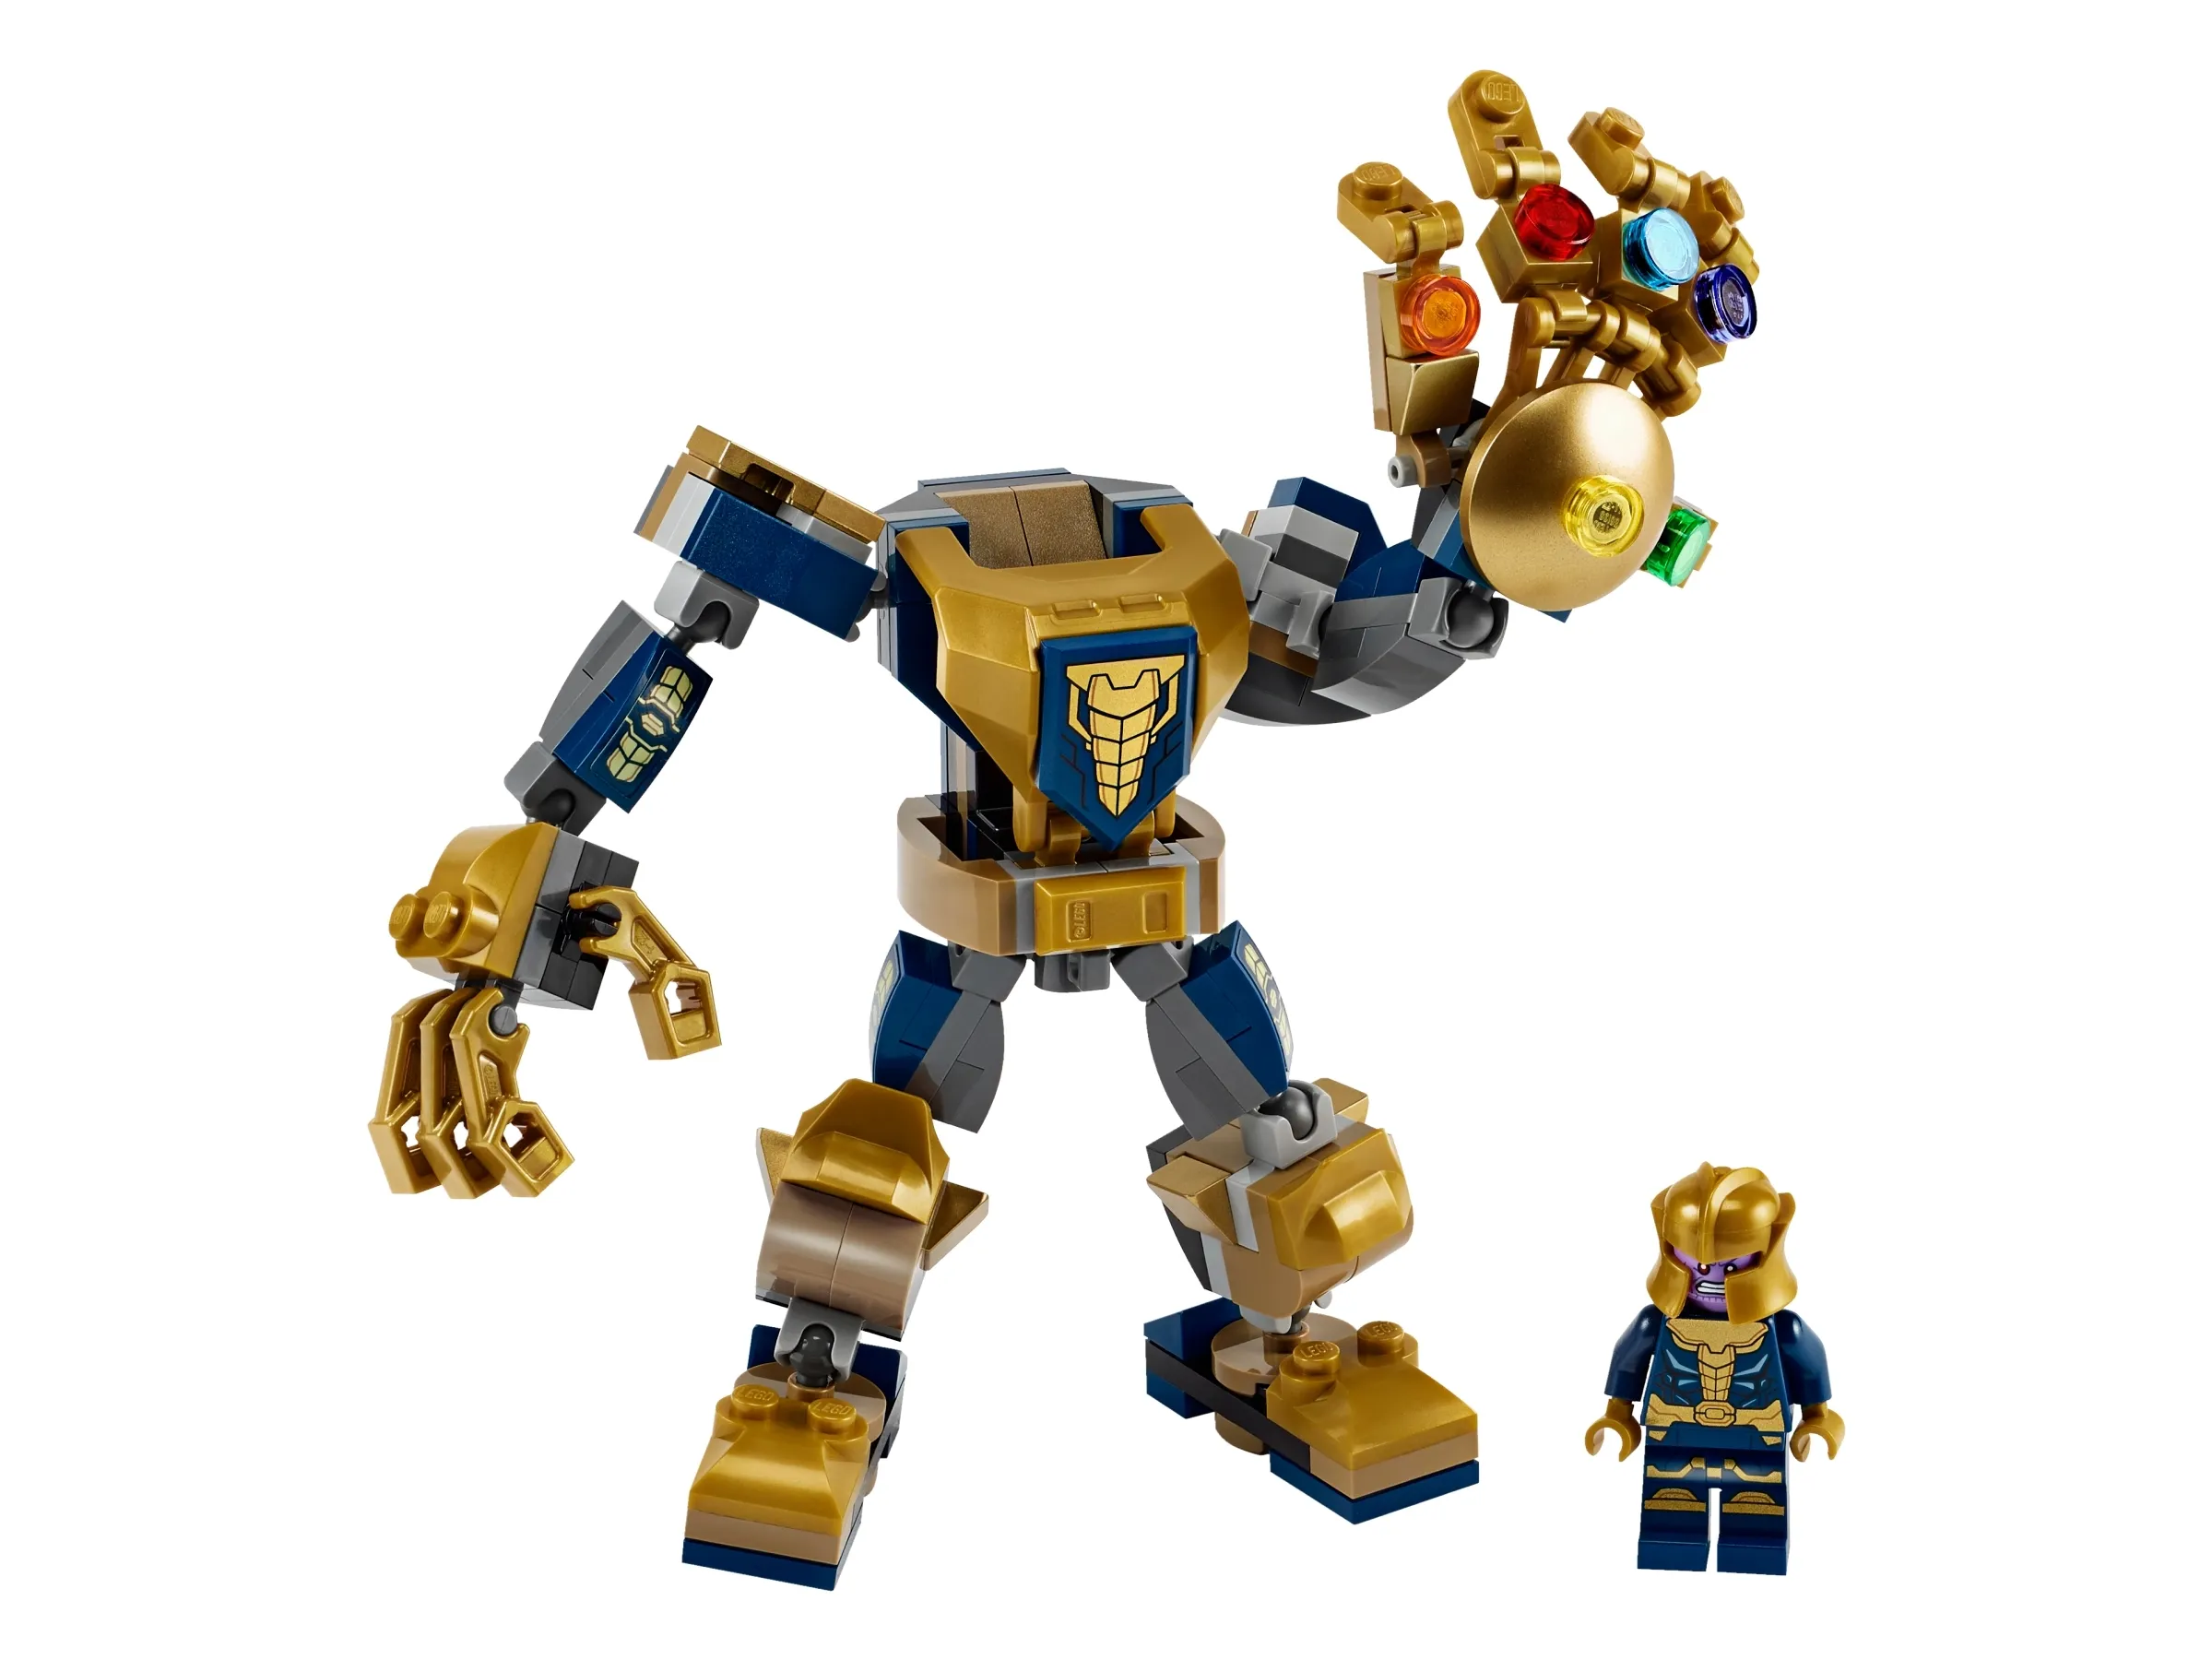 LEGO Avengers Thanos infinity gauntlet - pearl gold - Extra Extra